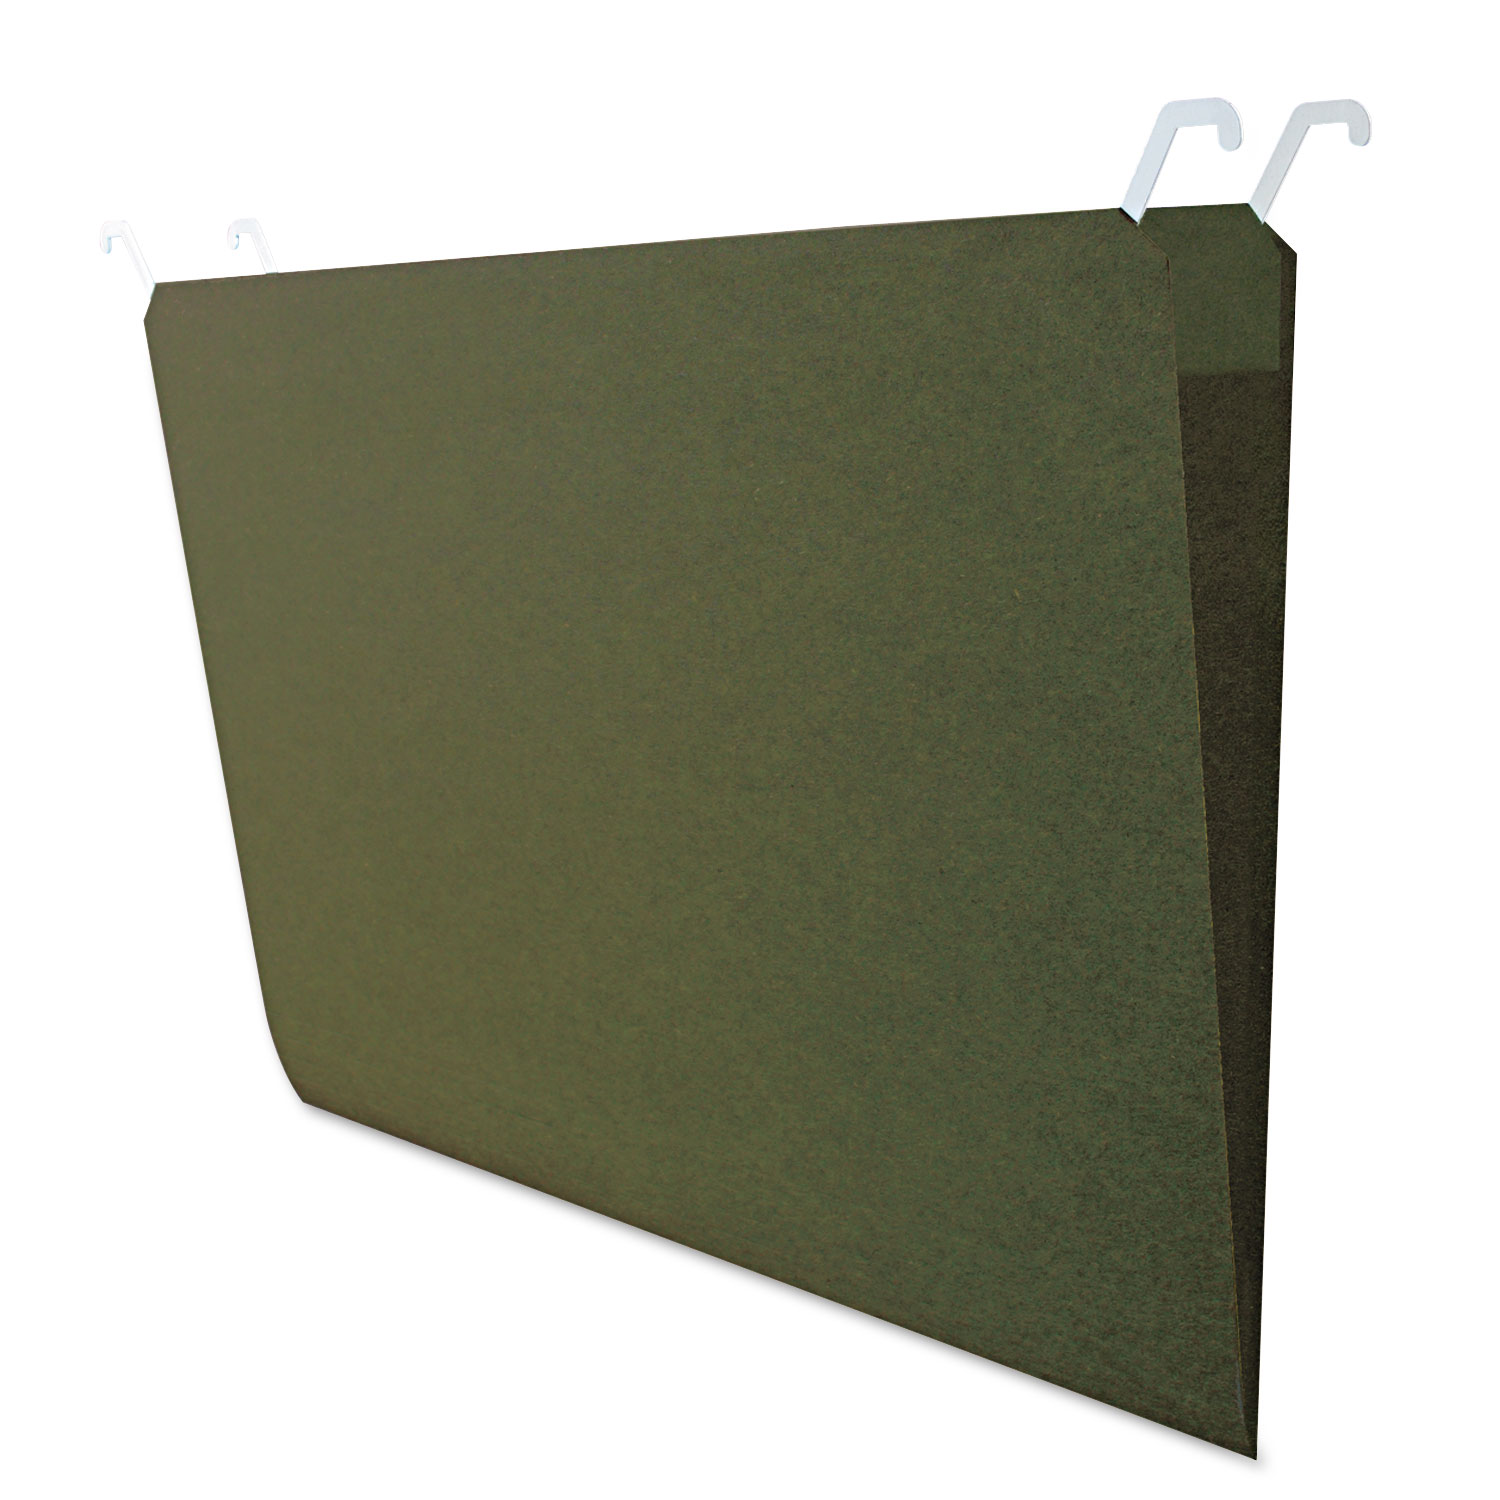  find It FT07043 Hanging File Folders with Innovative Top Rail, Legal Size, 1/4-Cut Tab, Standard Green, 20/Pack (IDEFT07043) 